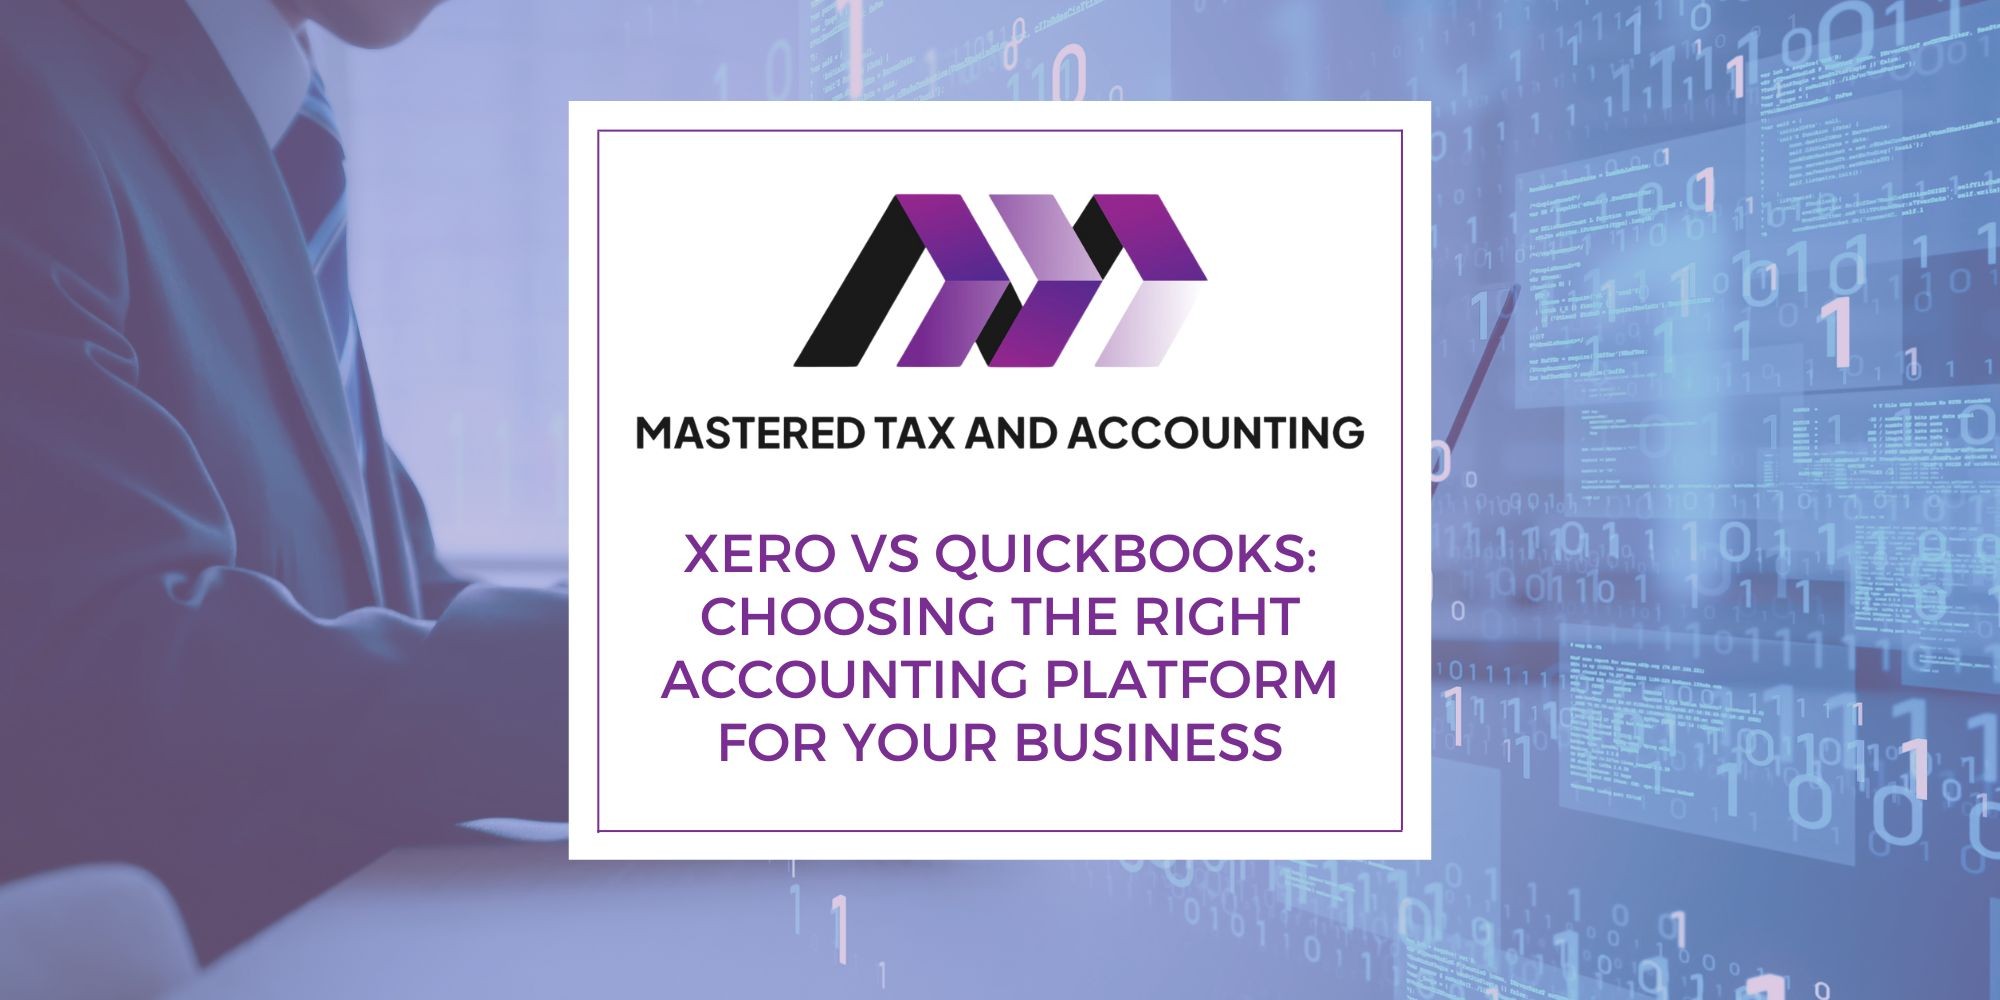 Xero vs QuickBooks: Choosing the Right Accounting Platform for Your Business